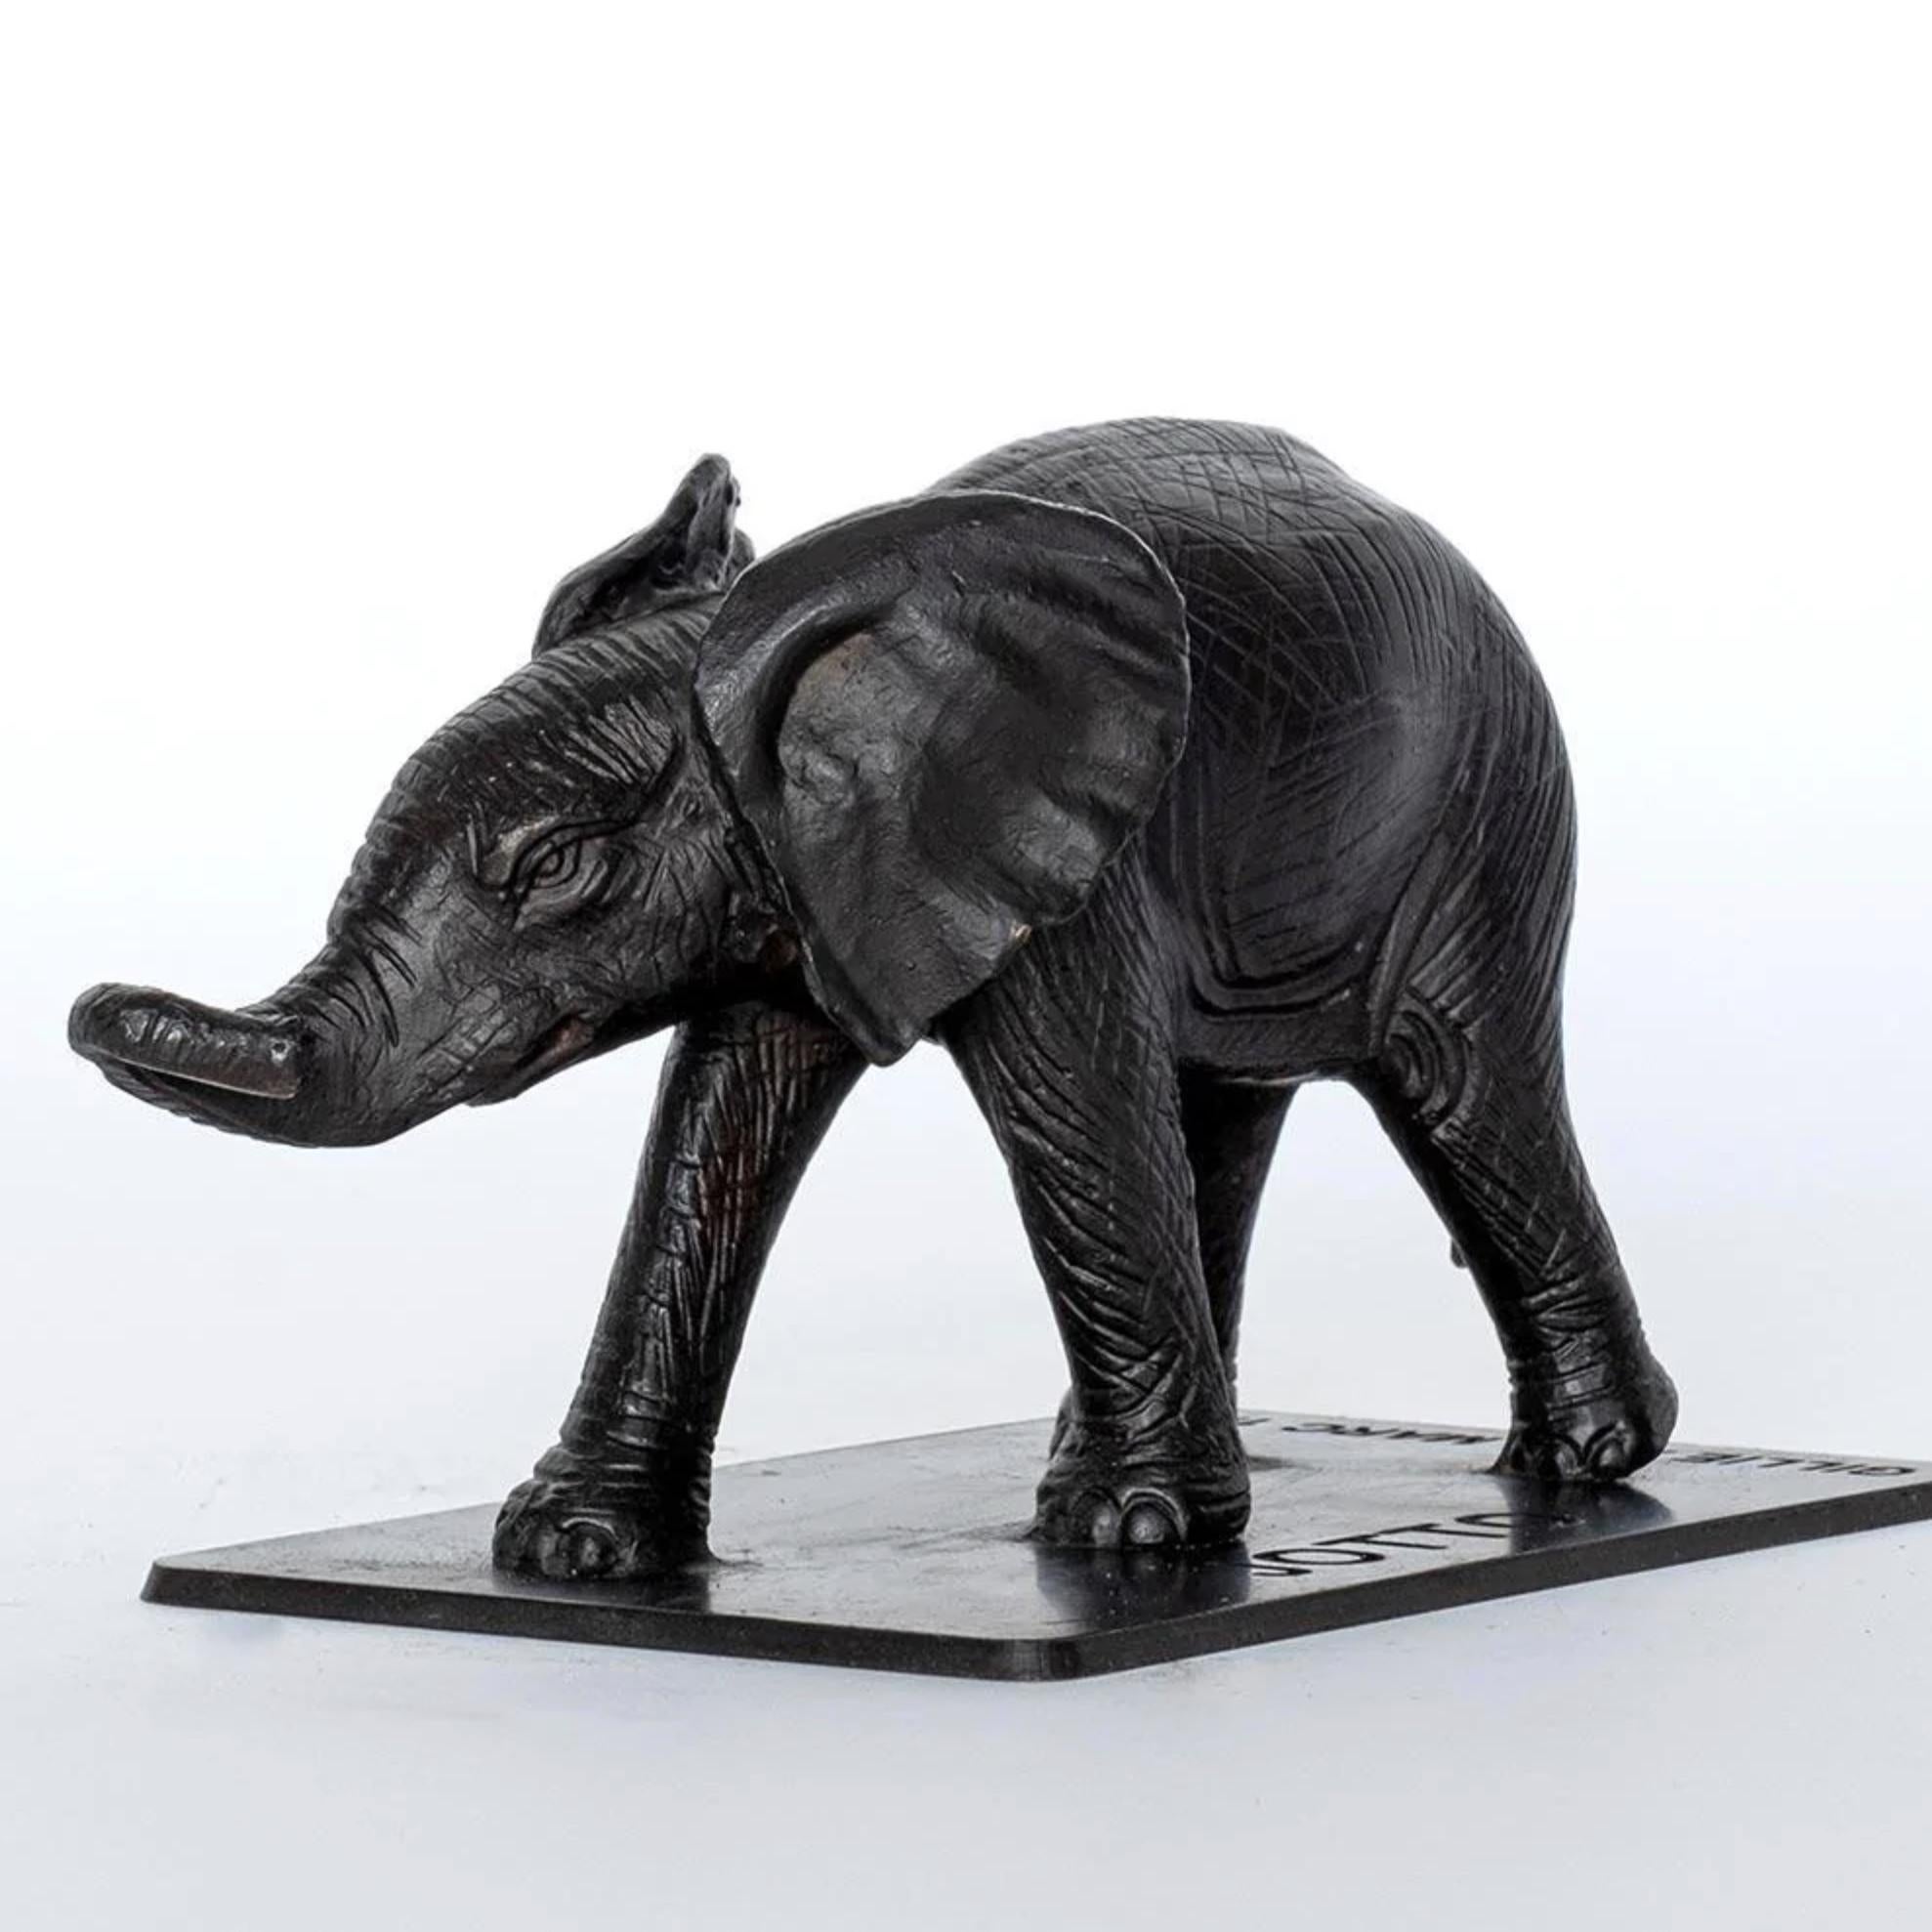 Gillie and Marc Schattner Figurative Sculpture - Authentic Bronze Orphan Jotto Elephant Sculpture by Gillie and Marc